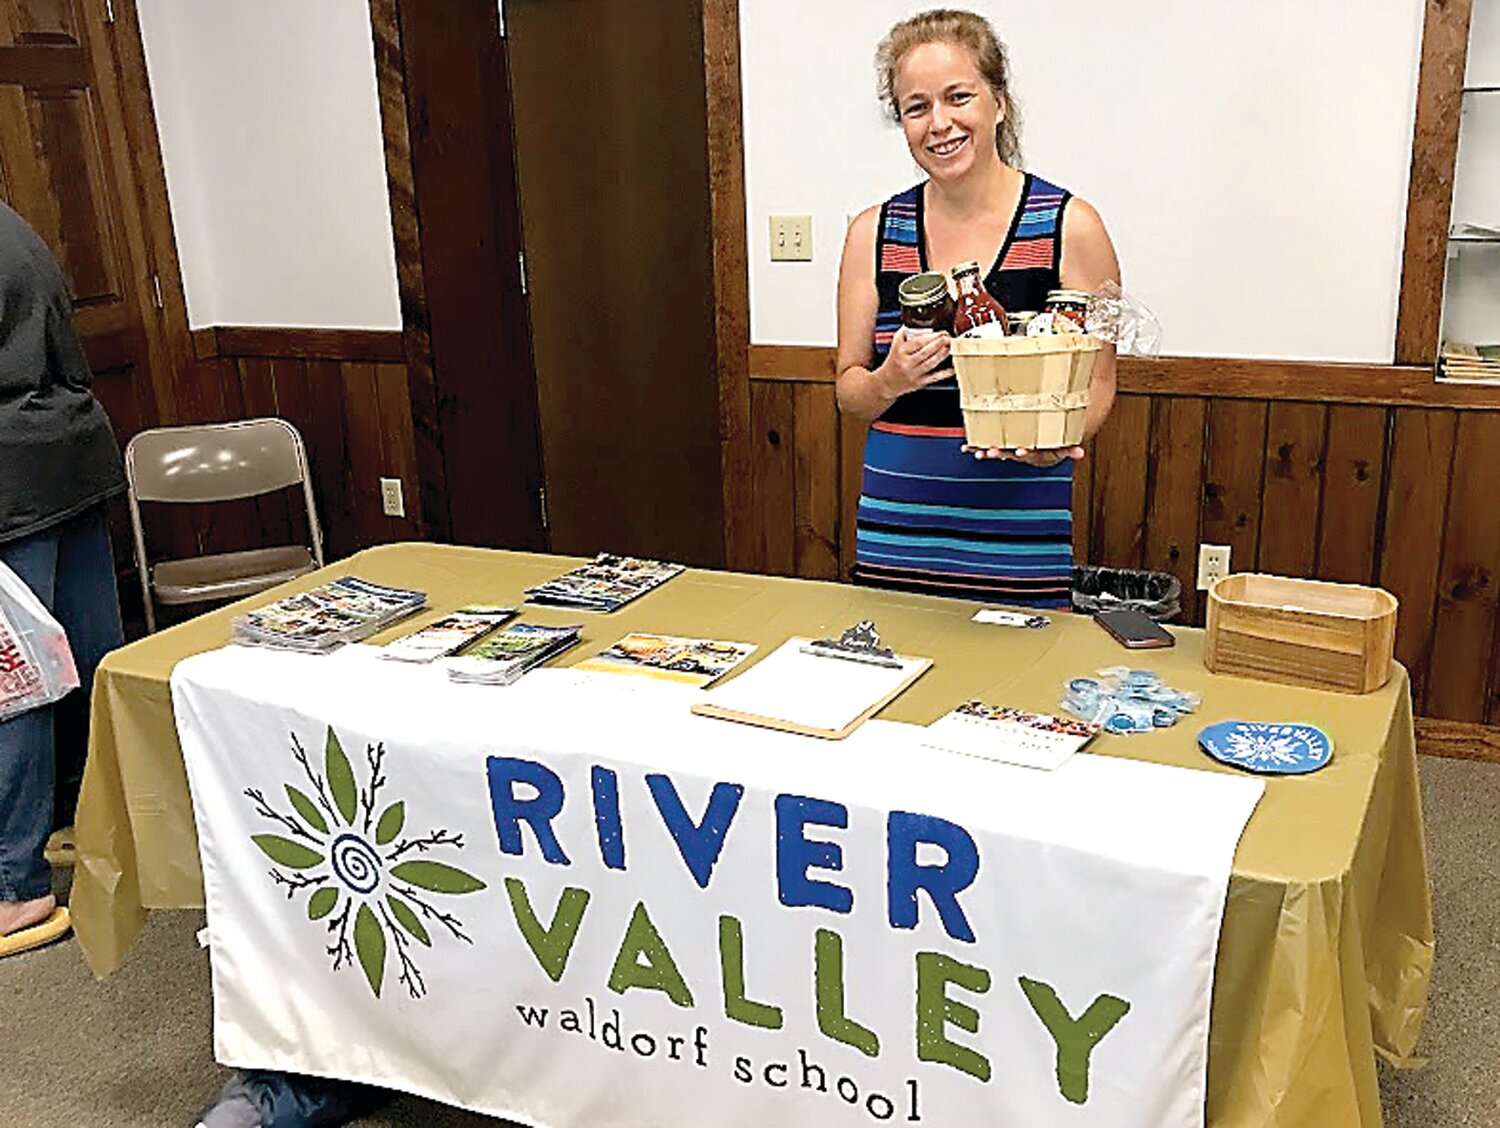 The River Valley Waldorf School in Upper Black Eddy provides information at Bridgeton Township’s UBE Community Resource Day Aug 12.